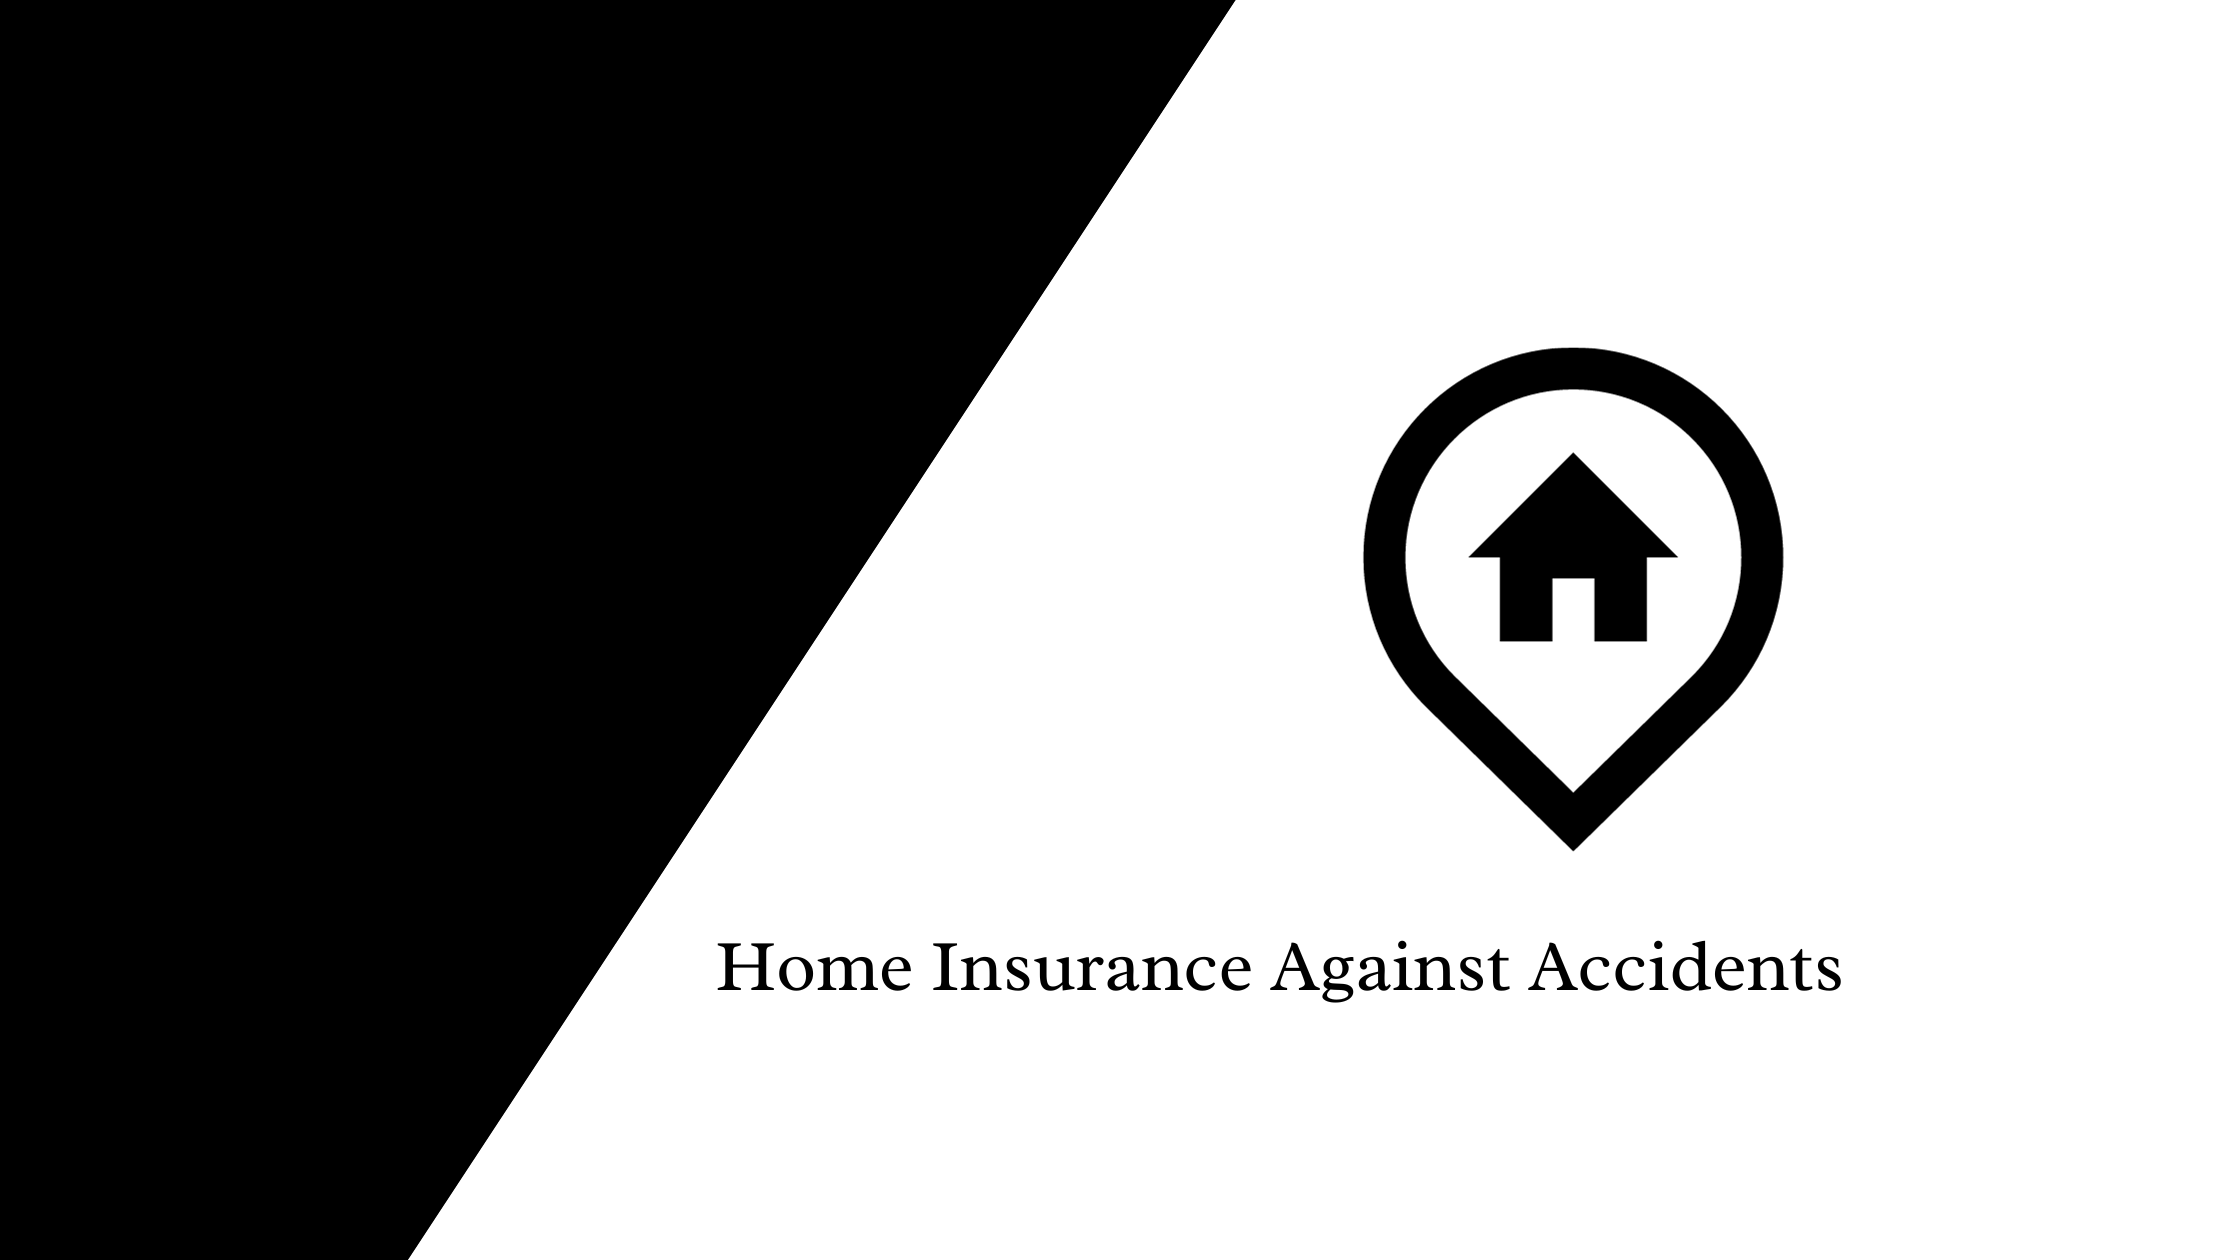 Home insurance against accidents